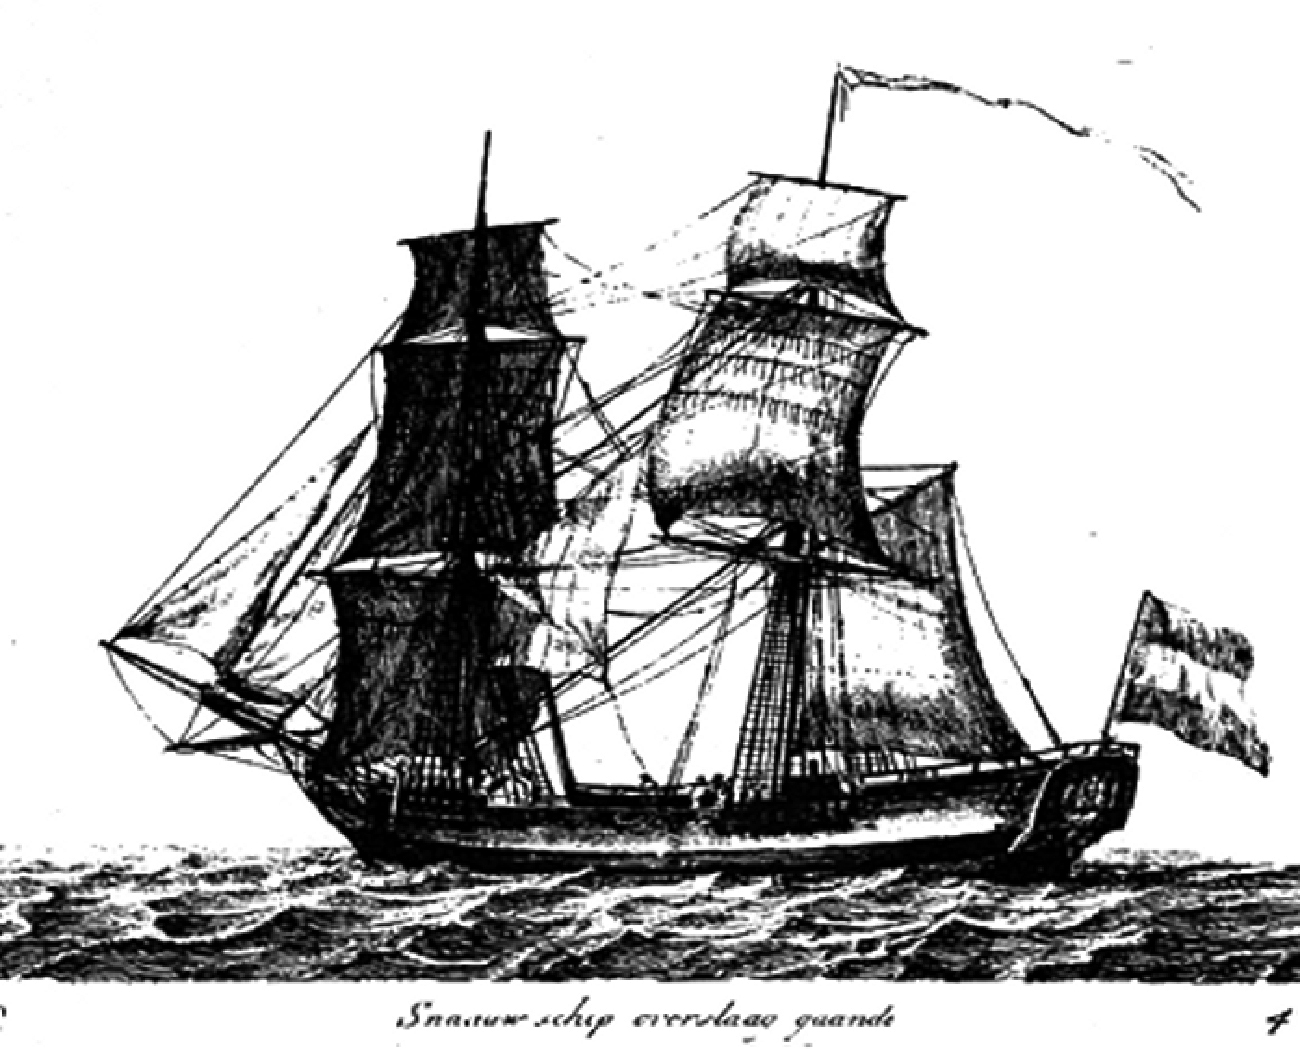 The fate of the ship was subsequently forgotten and it was not until the 1970s that Swedish historian Christian Ahlström found information about the Frau Maria in the Finnish archives. Photo: A drawning of the Frau Maria. Source: Wikipedia.org